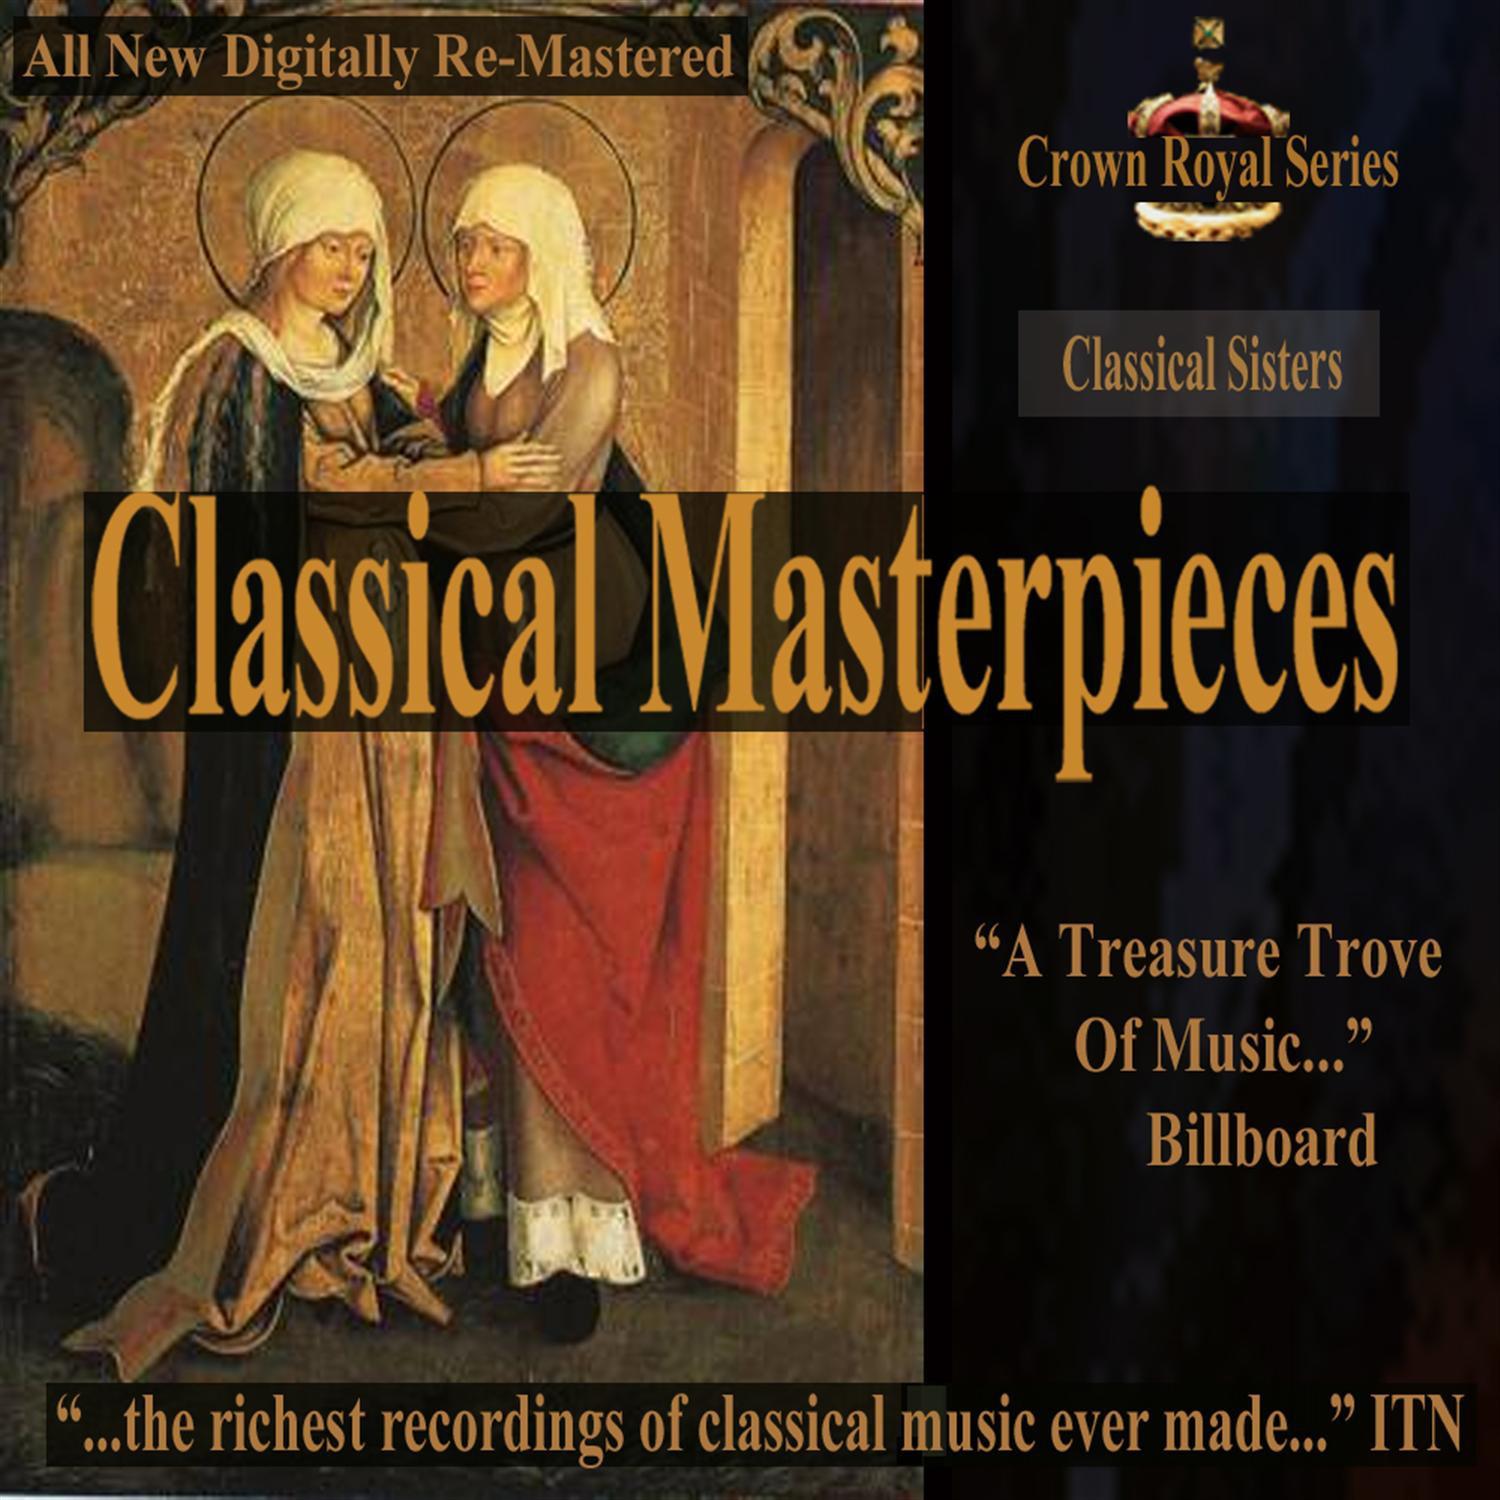 Concerto for Violin and Orchestra in D Major Op. 35, Allegro moderato, Part 2